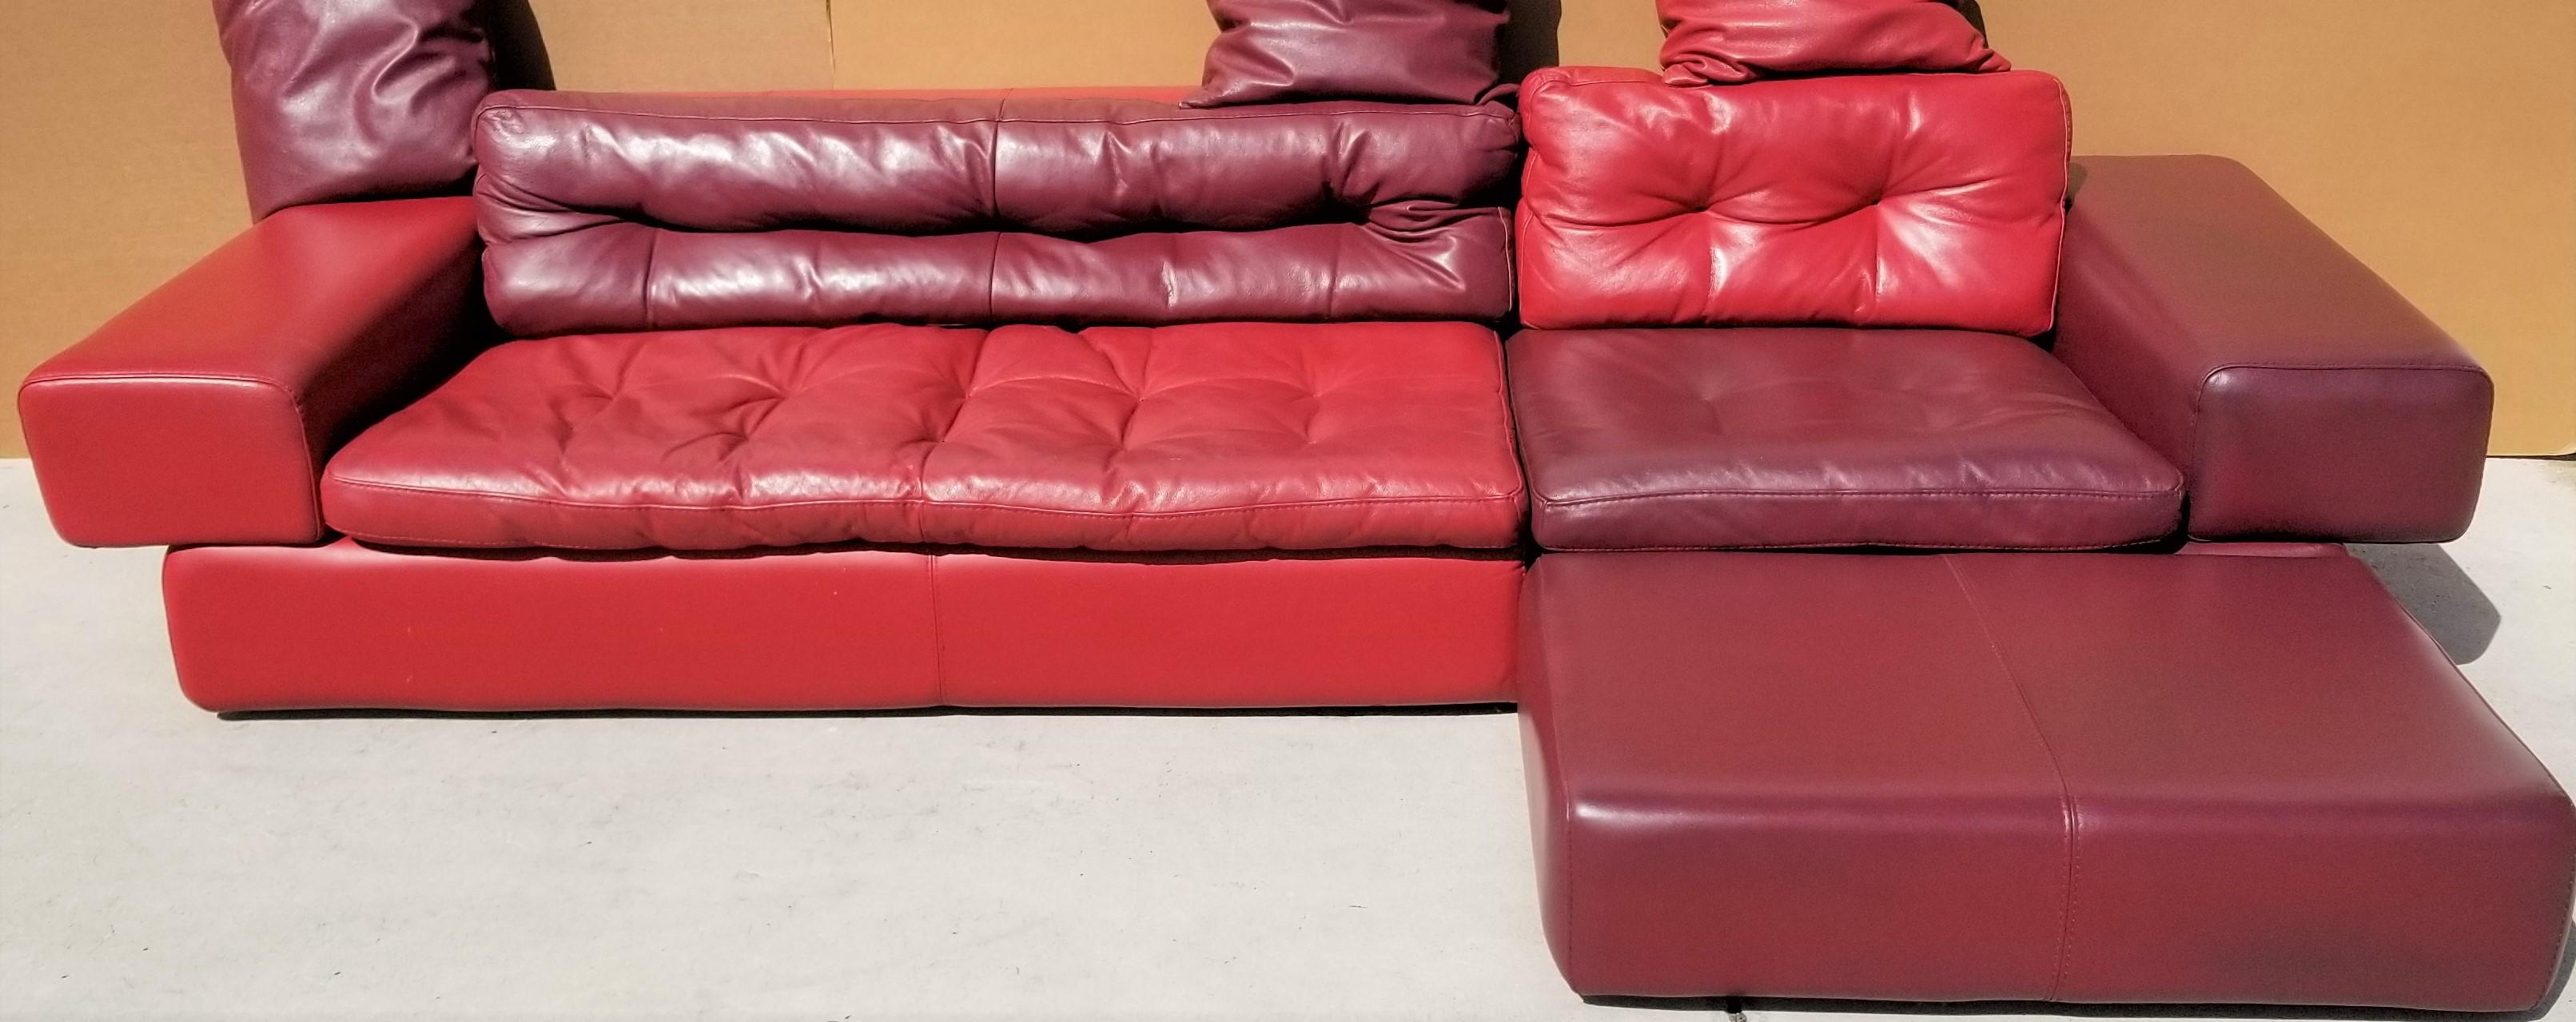 Roche Bobois Leather Sectional Sofa with Ottoman 10